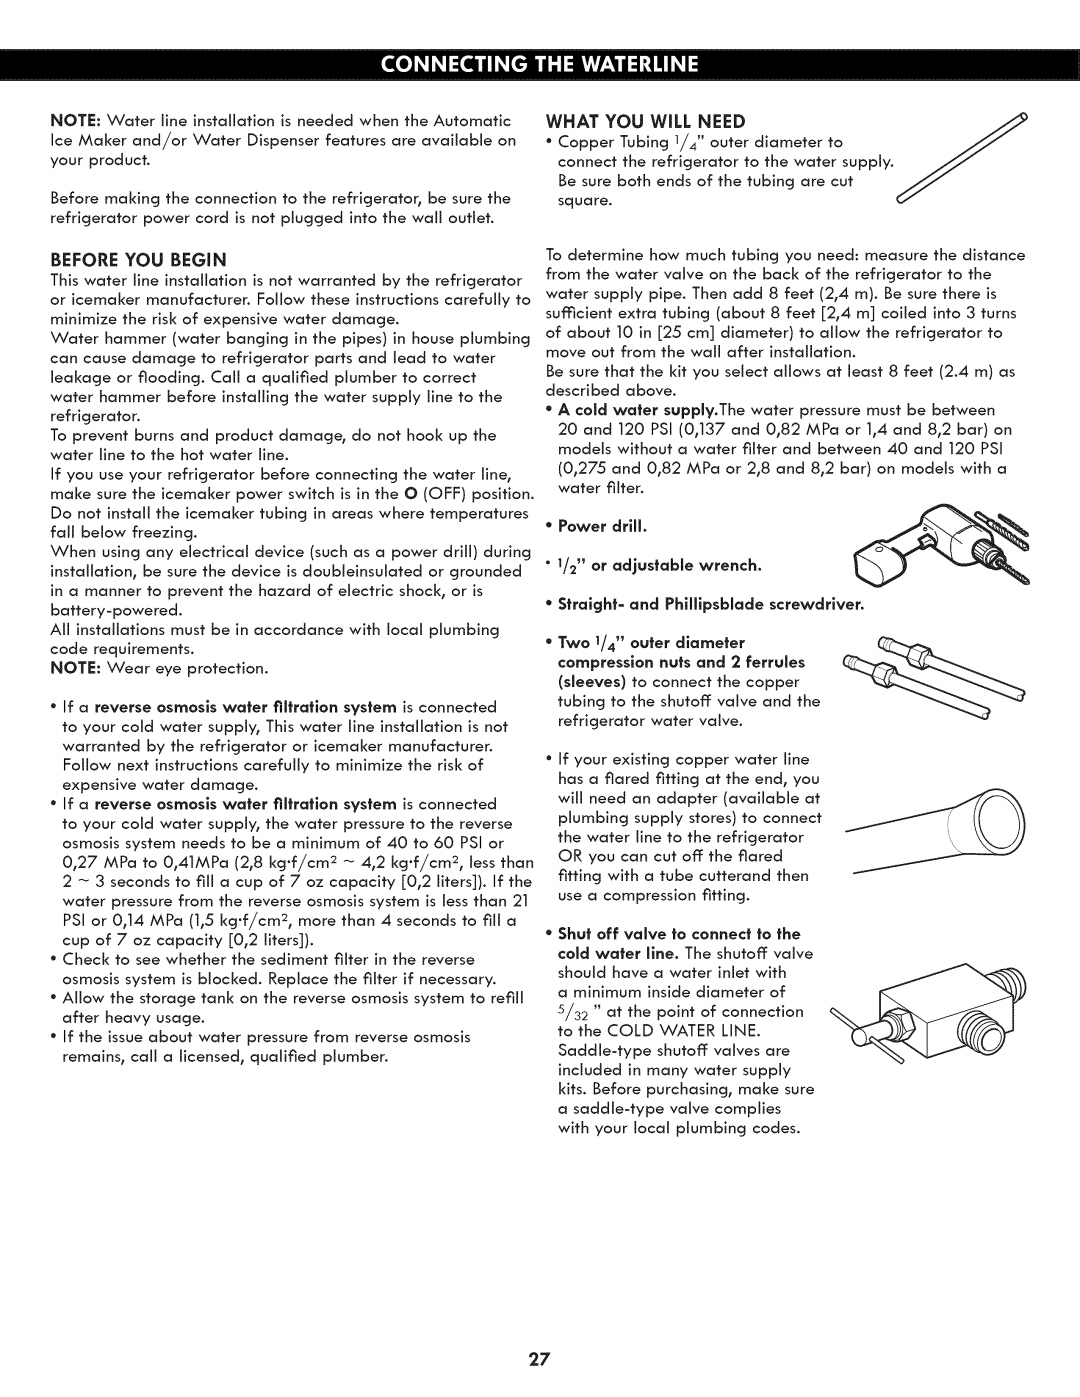 Kenmore 795.7130 manual Before You Begin, What You Will Need, Straight= and Phifflpsblade screwdriver 